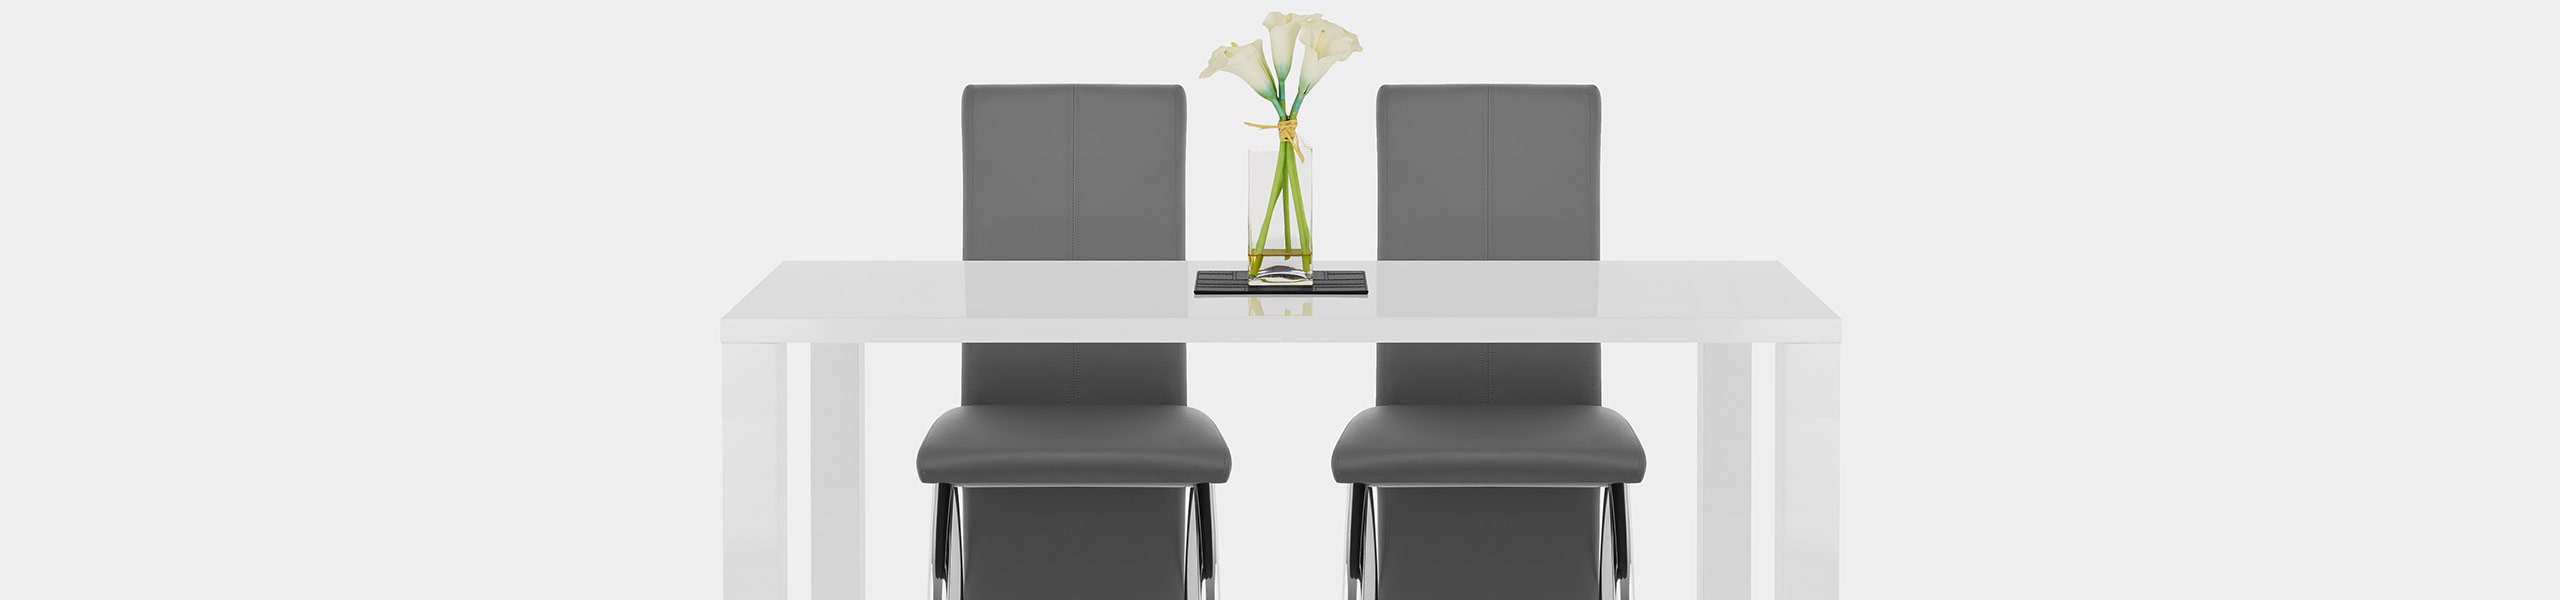 Dali Dining Chair Grey Video Banner